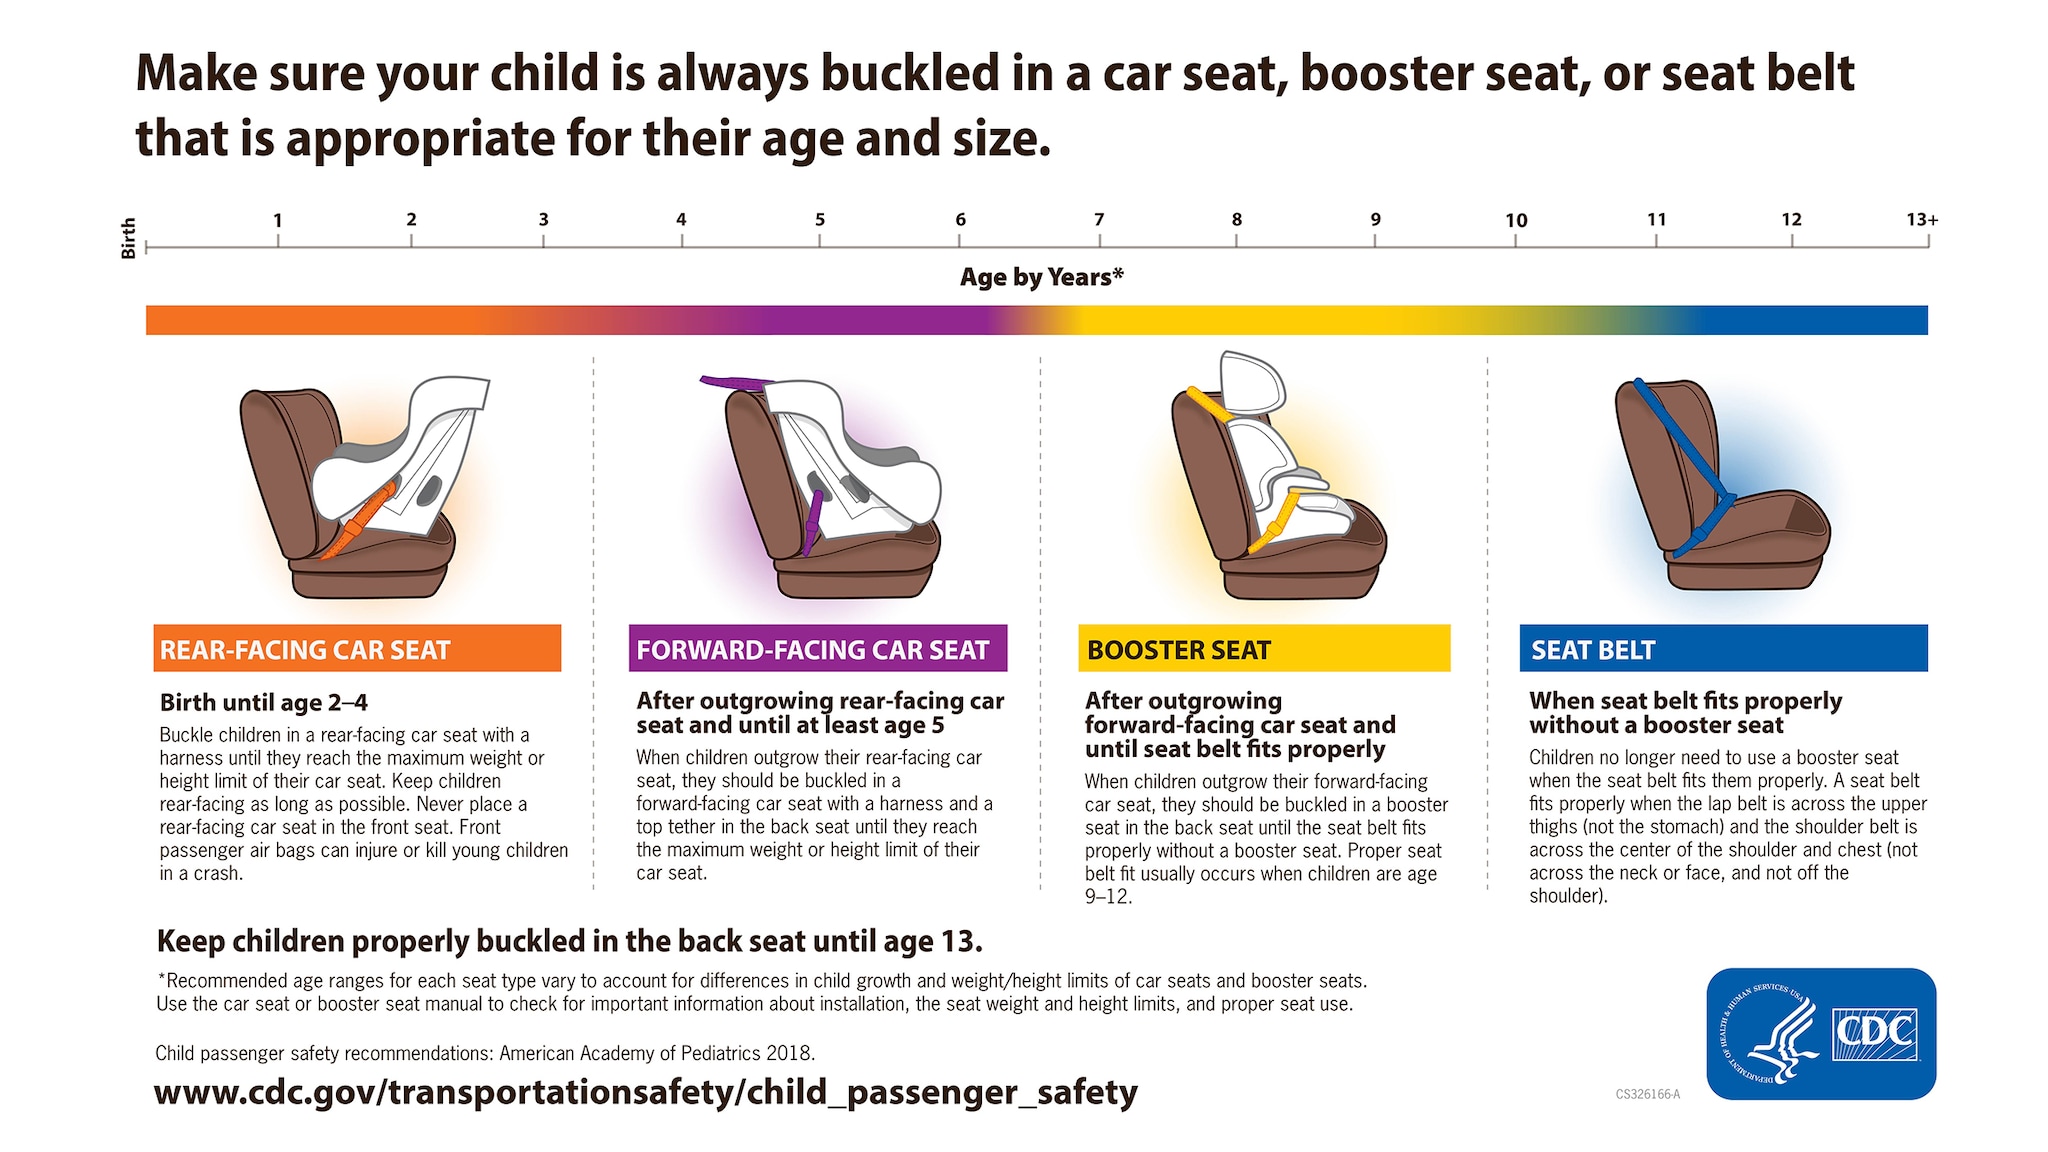 https://www.cdc.gov/transportationsafety/images/child_passenger_safety/21_326166_A_Hull_Restraints_2500x1406.png